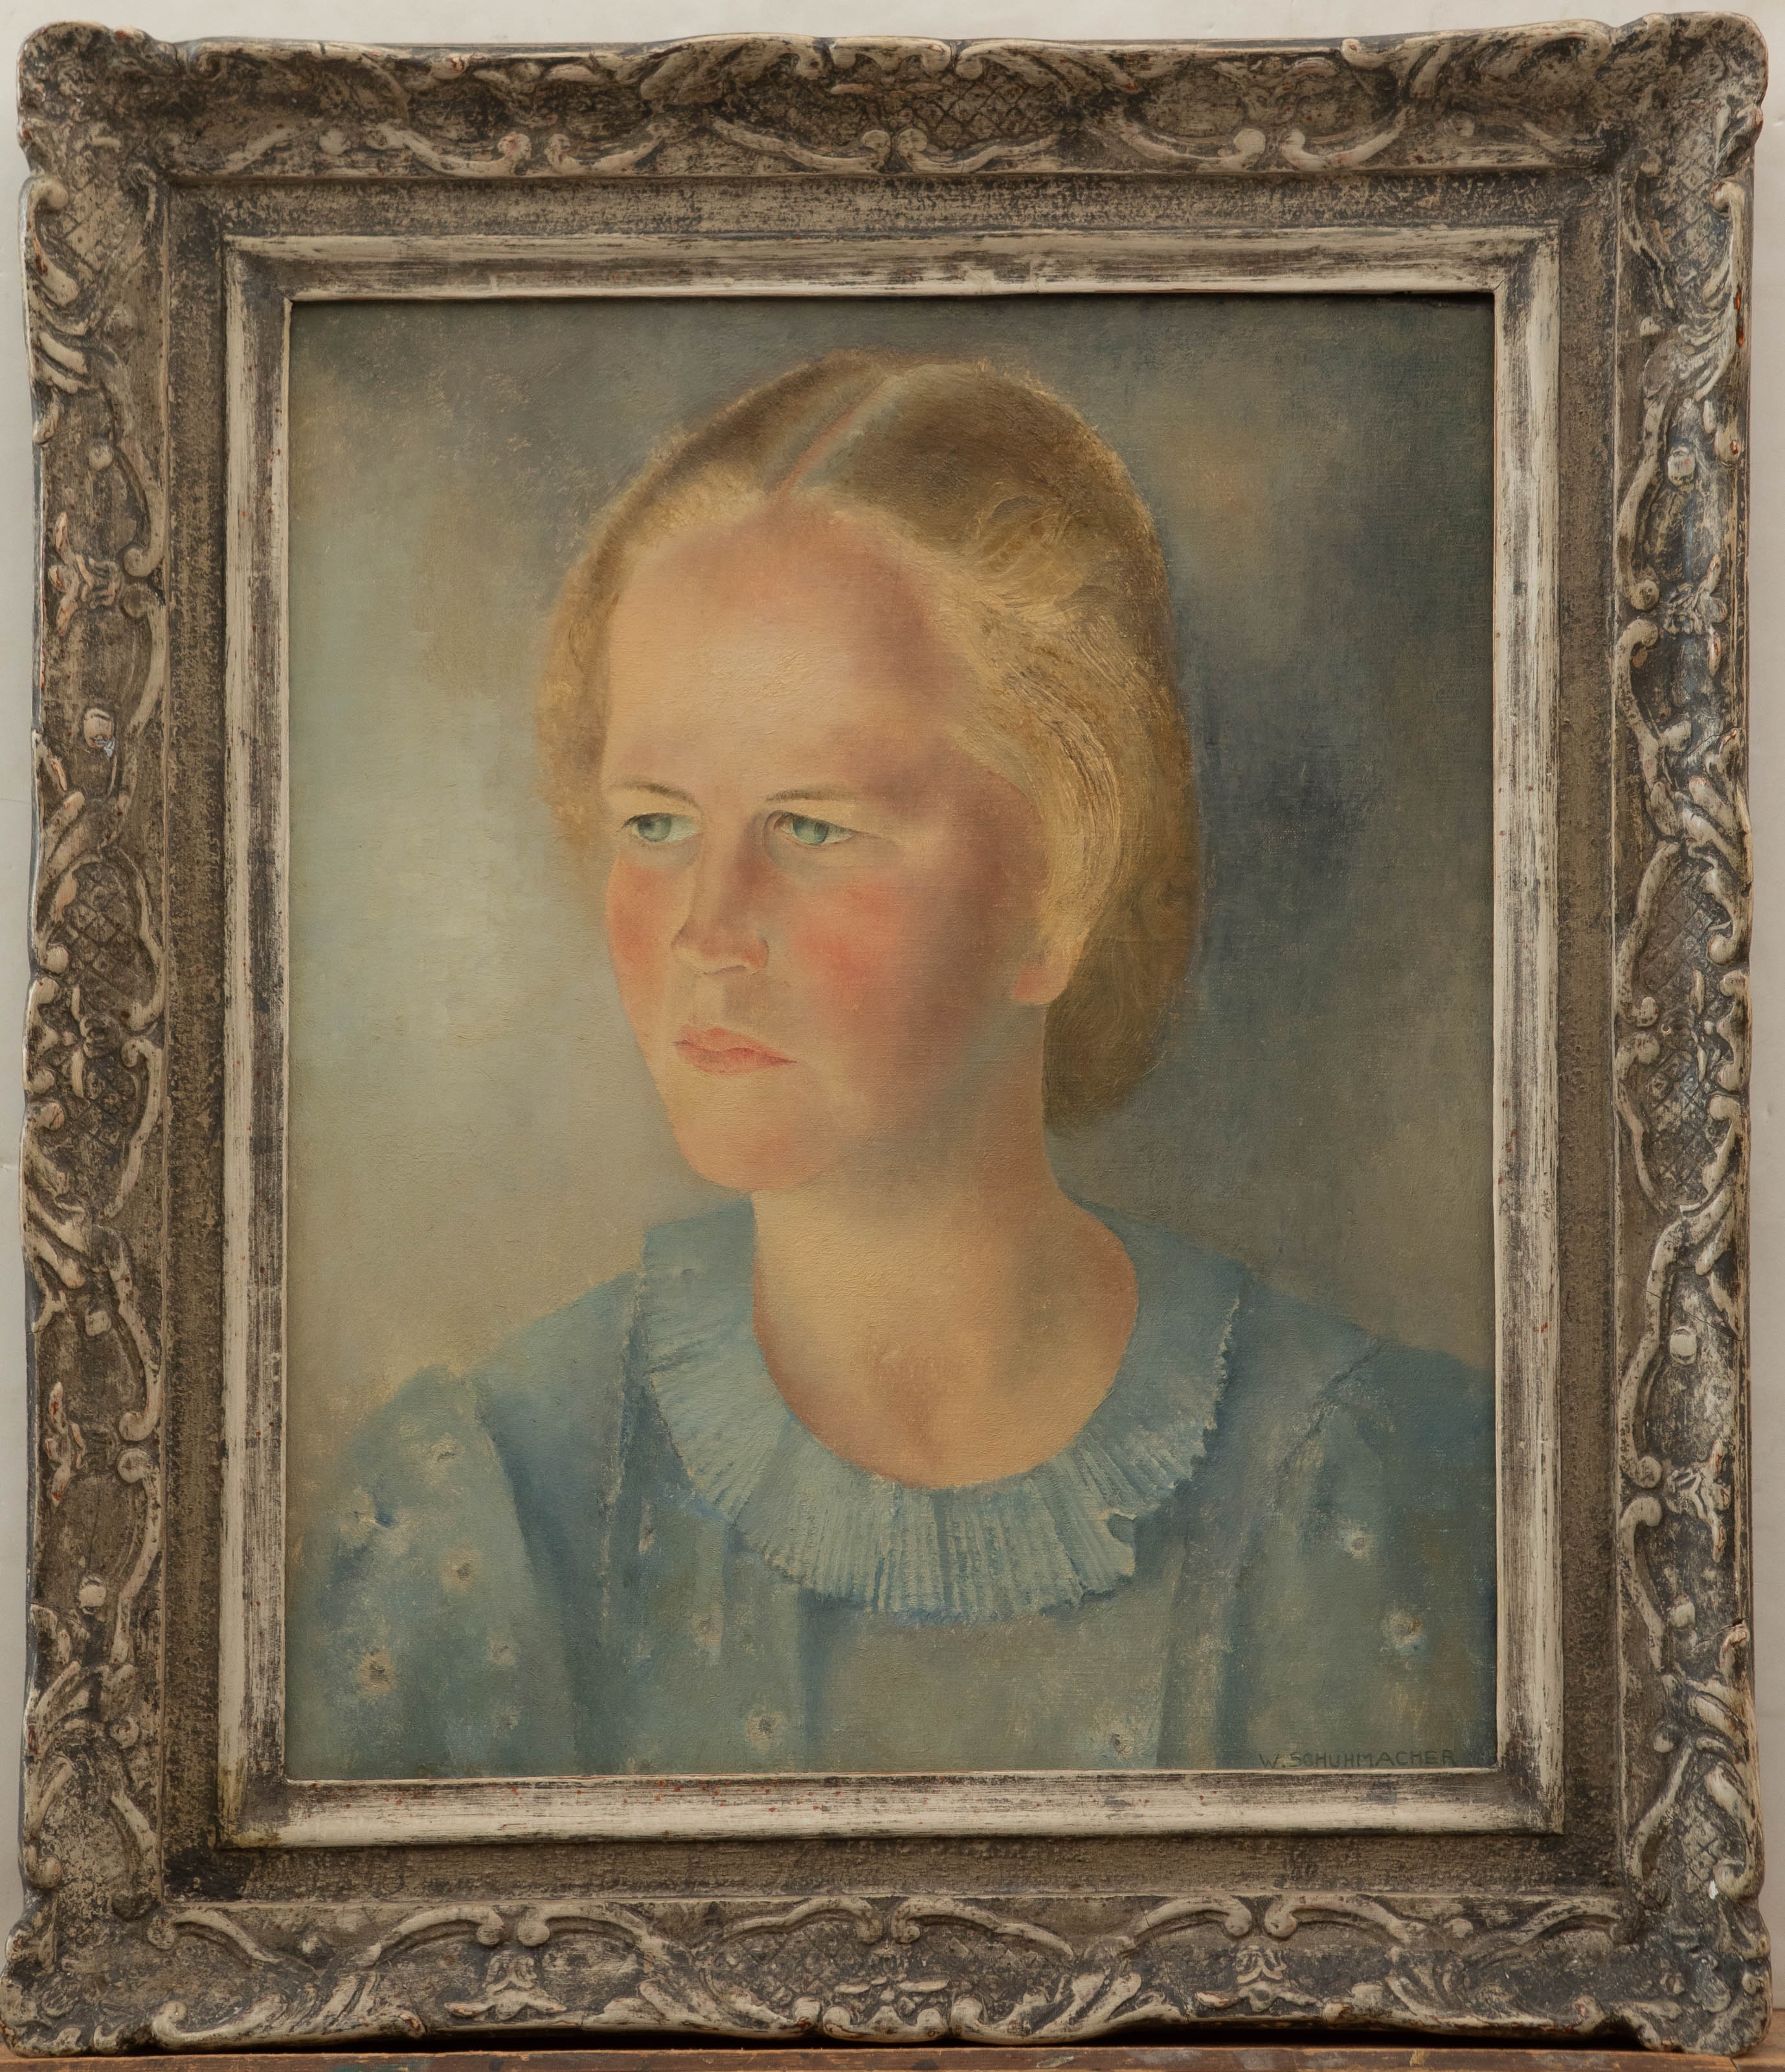 Artwork by Wim Schuhmacher, Young girl, 1935, Made of Canvas